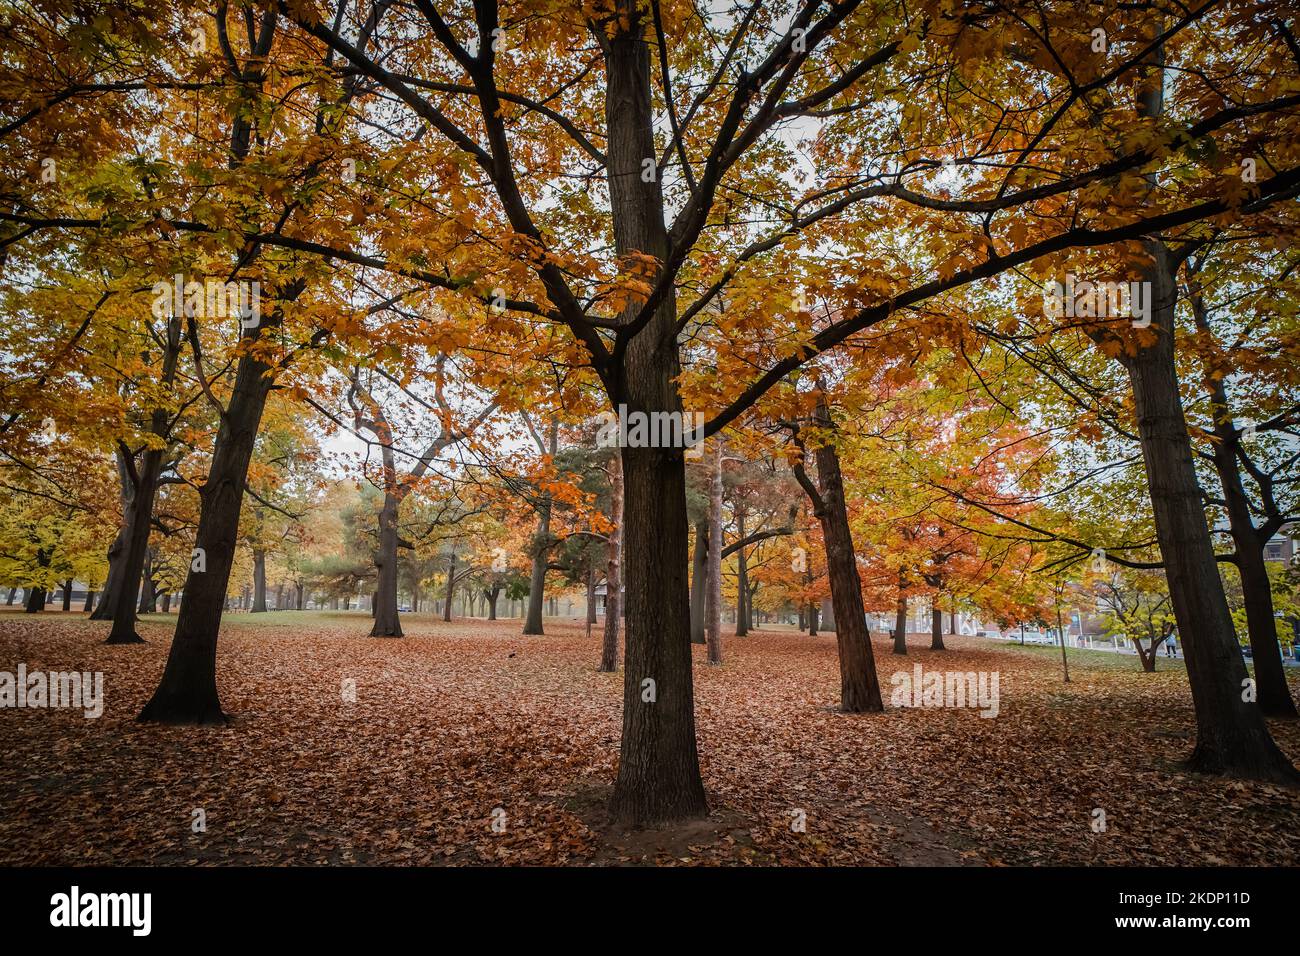 Huge trees in a park during the fall autumn season Stock Photo